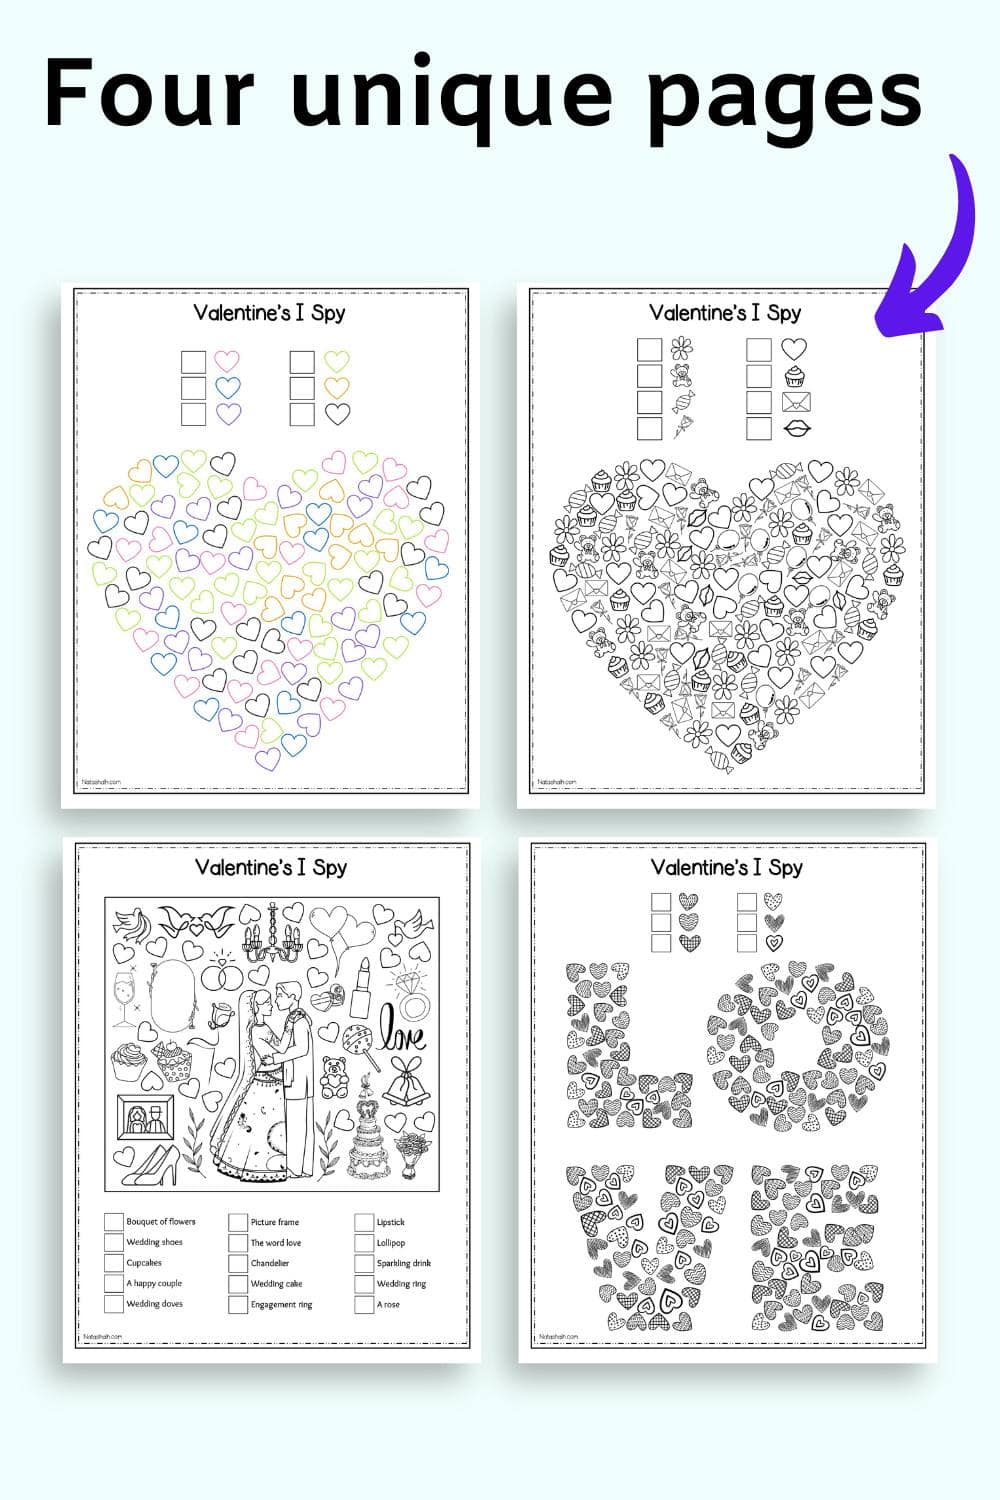 Text "four unique pages" and an arrow pointing at four pages of I Spy printable with a Valentines' Day theme